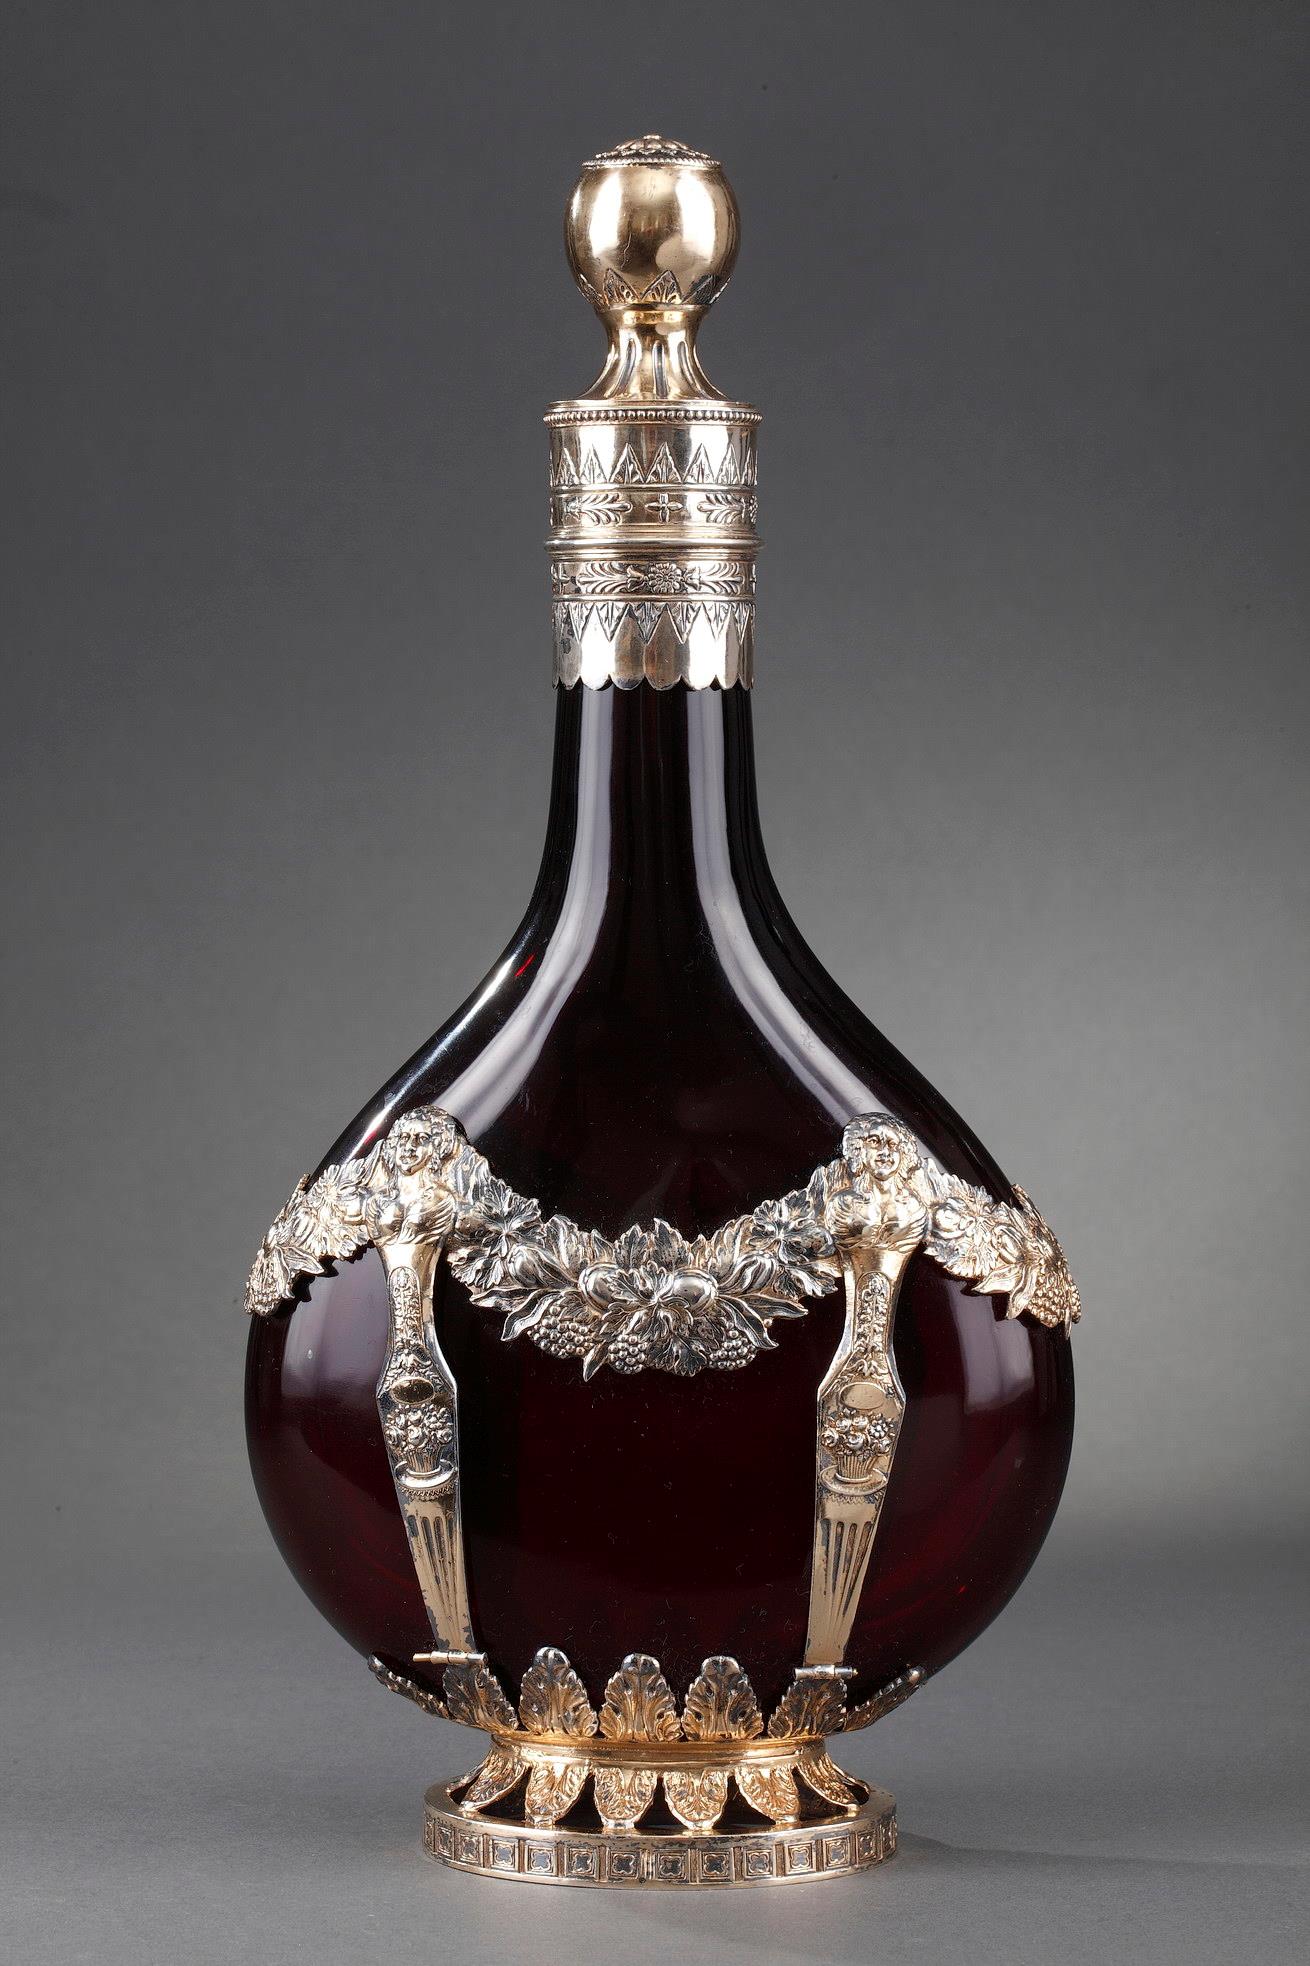 19th-century German silver mounted red crystal bottle